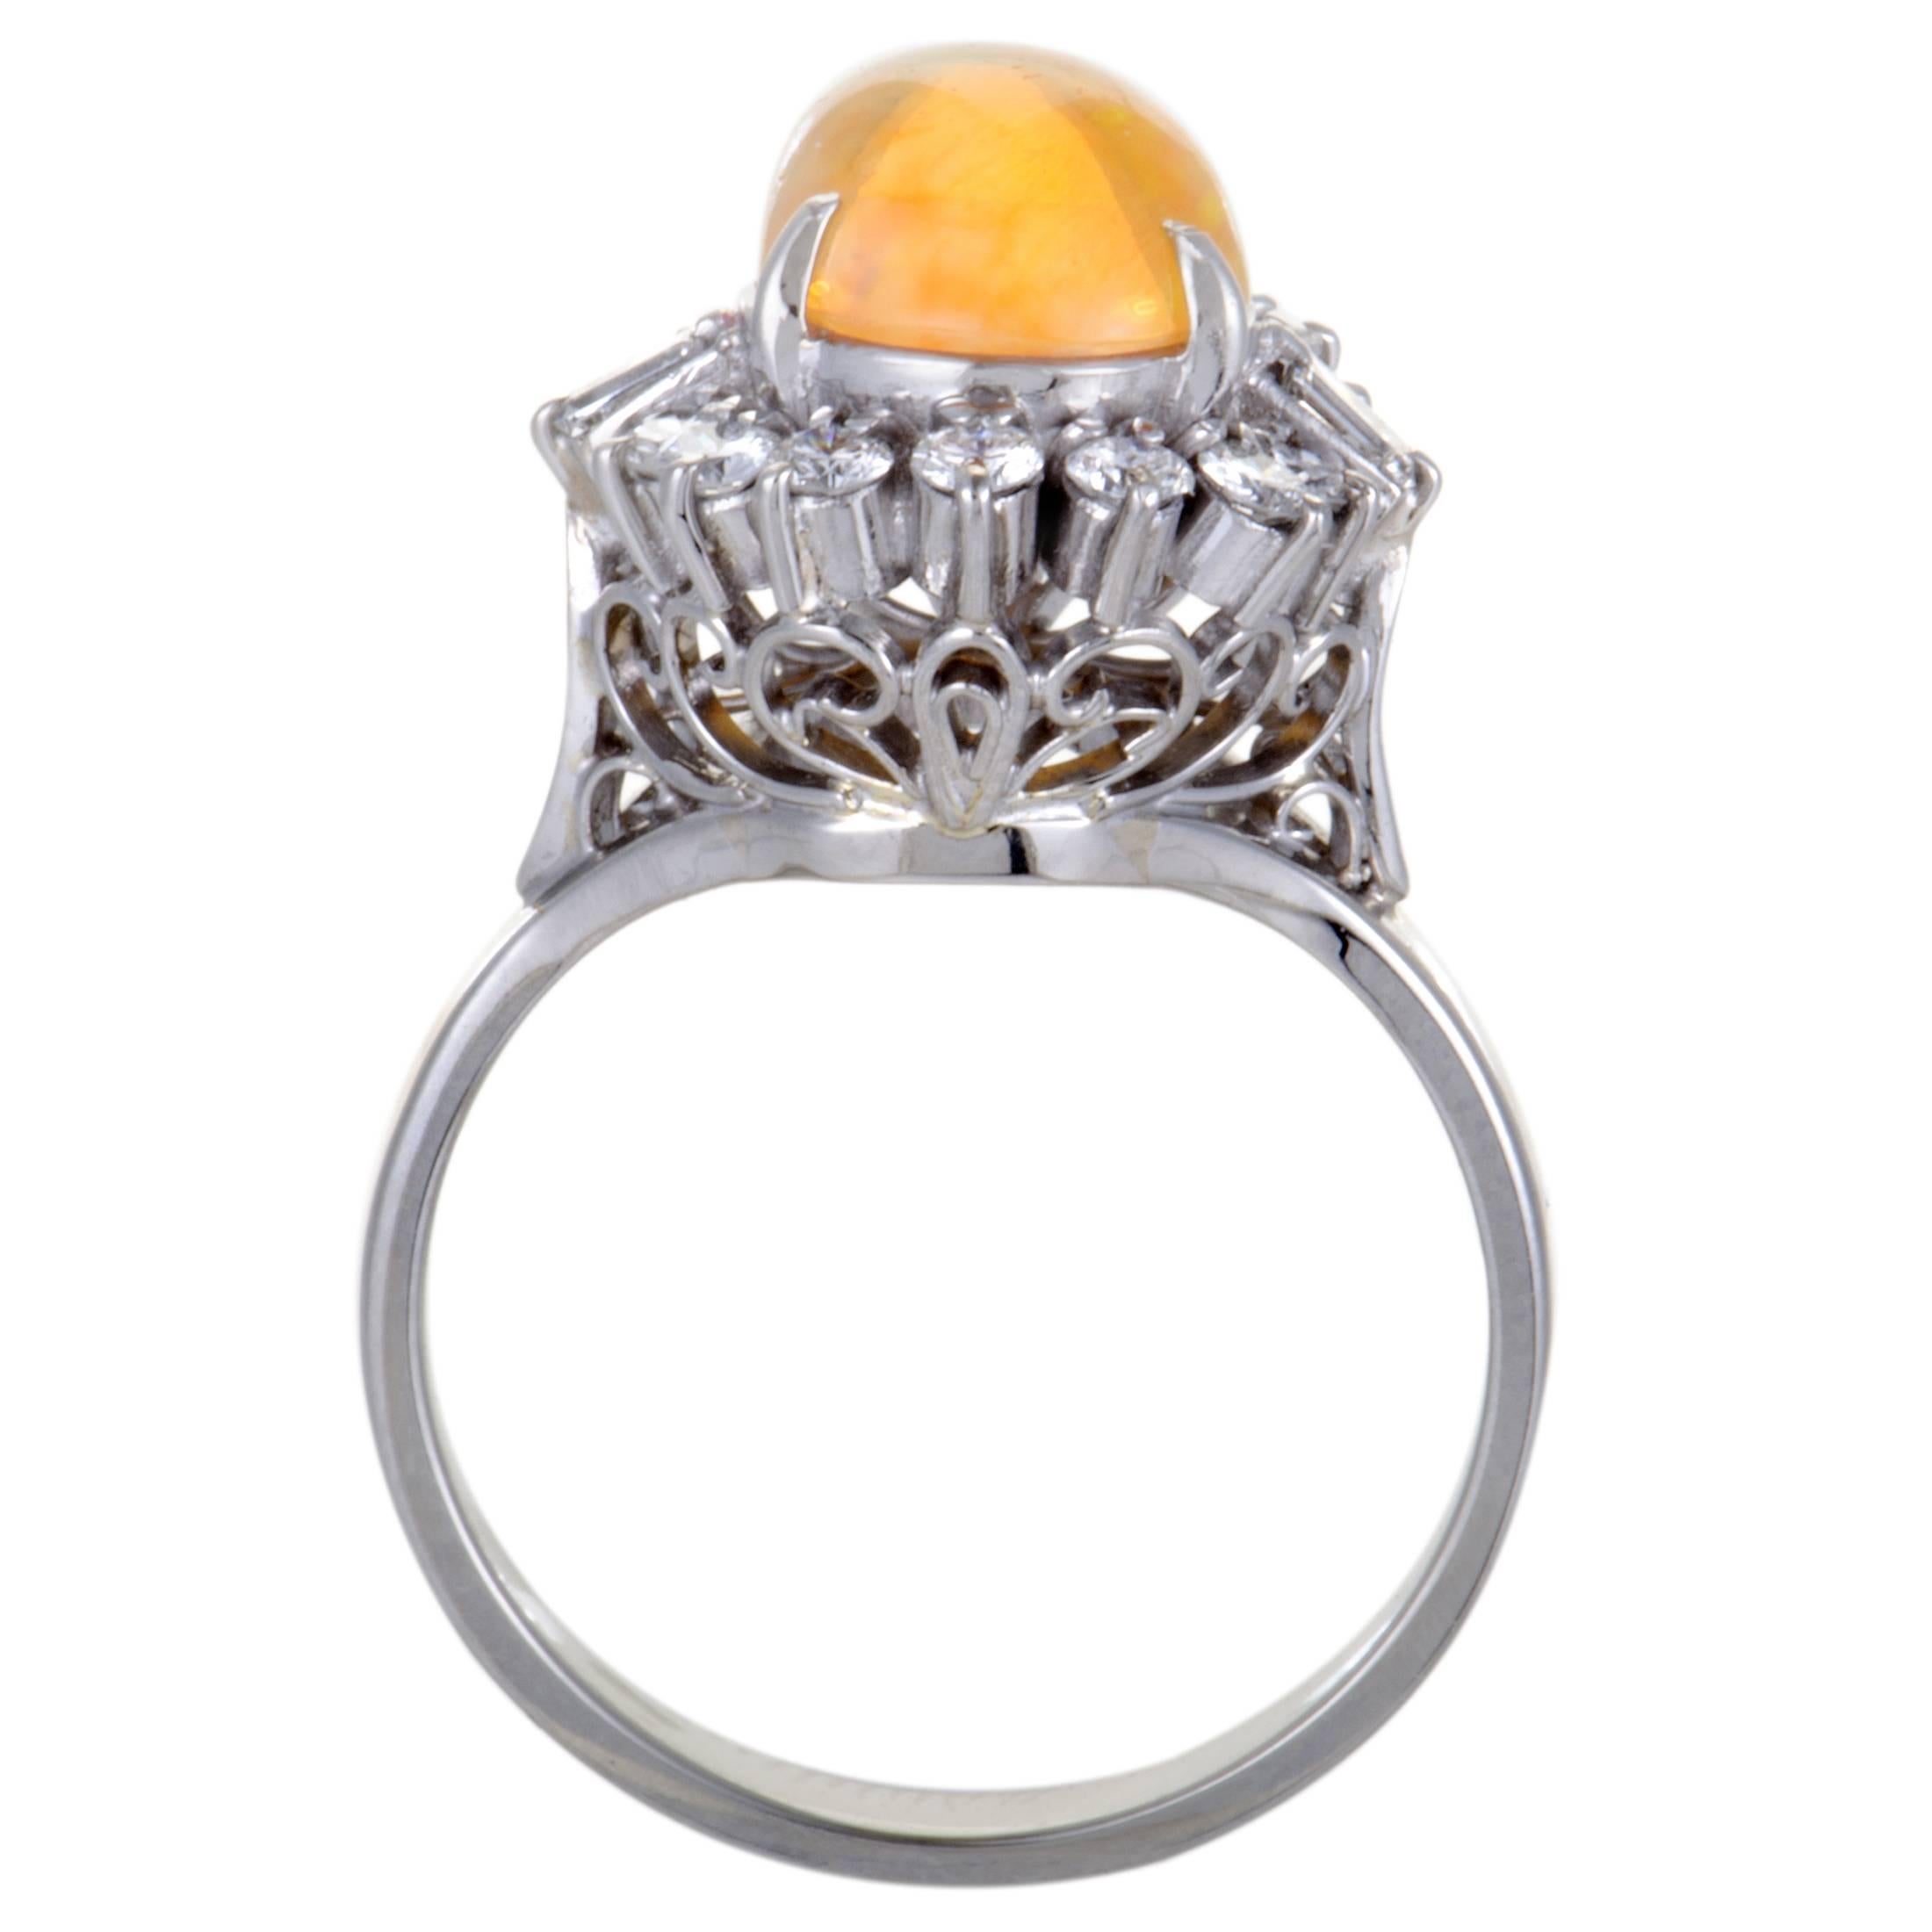 Extravagantly designed in shimmering platinum, this opulent ring is a blend of elegance and style. The glamorous ring is adorned in a sparkling pave of 0.53ct diamonds surrounding a mesmerizing yellow fire opal that makes the piece alluring and a